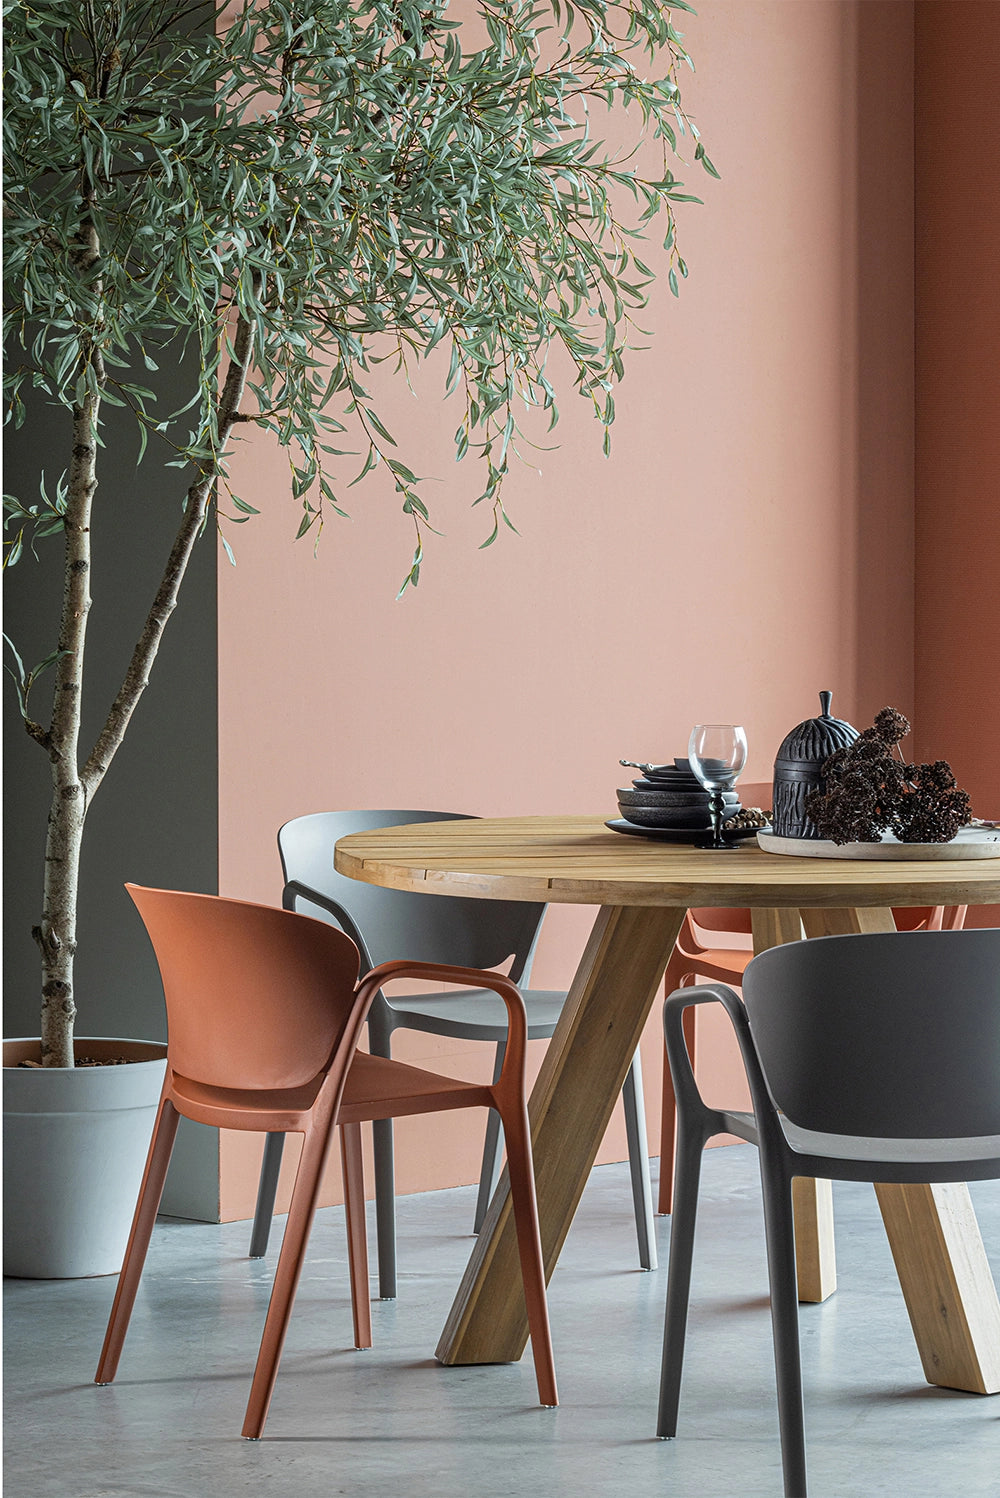 Greta Polypropylene Chair Taupe with Greta Chair in Terra and Round Wooden Table in Dining Area Setting